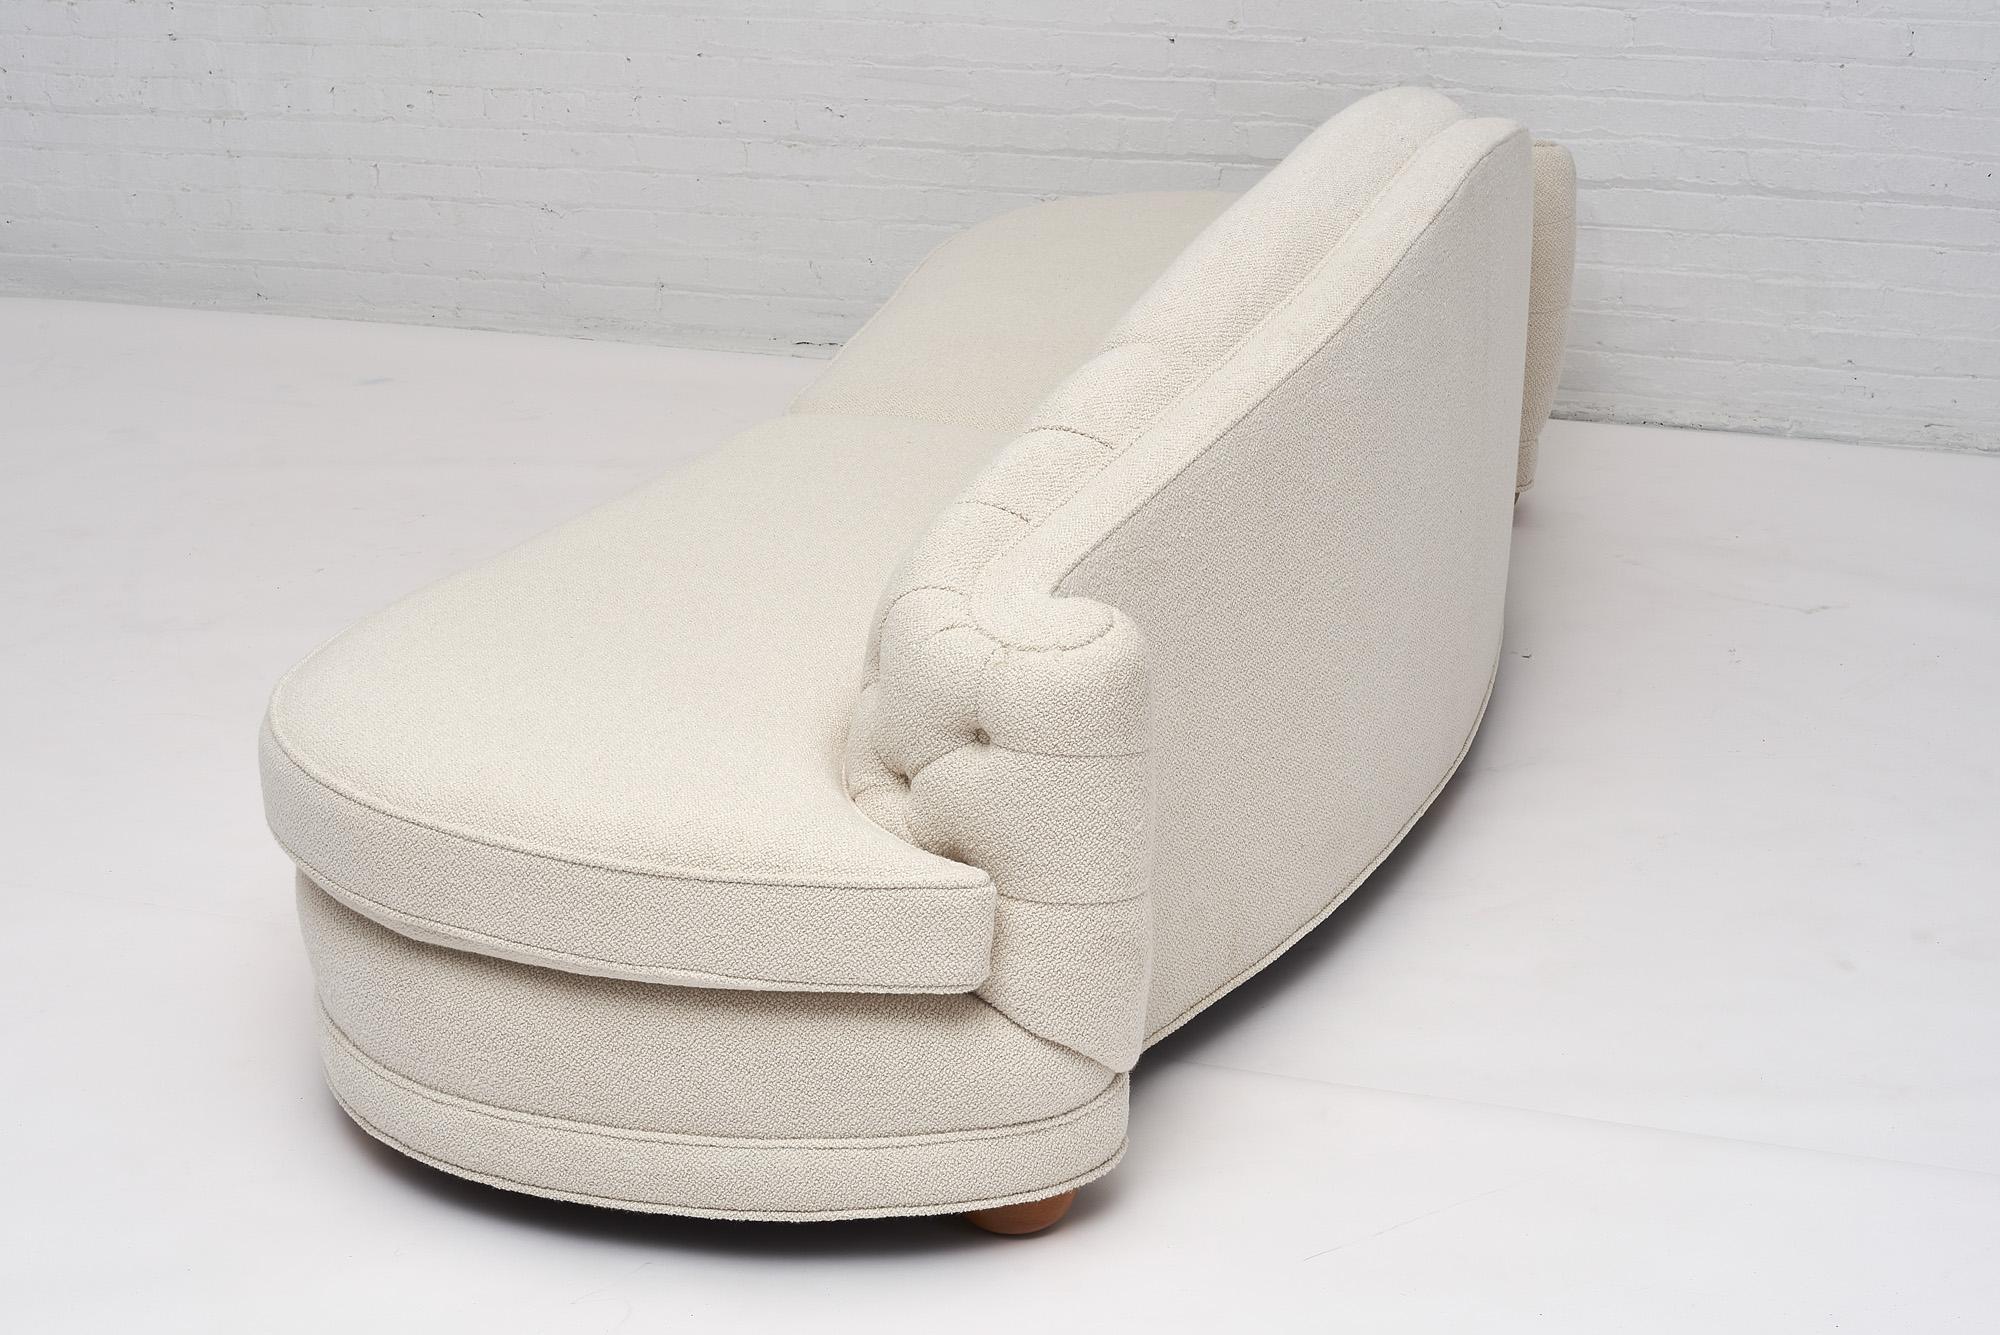 Bouclé William “Billy” Haines Sofas in White Boucle